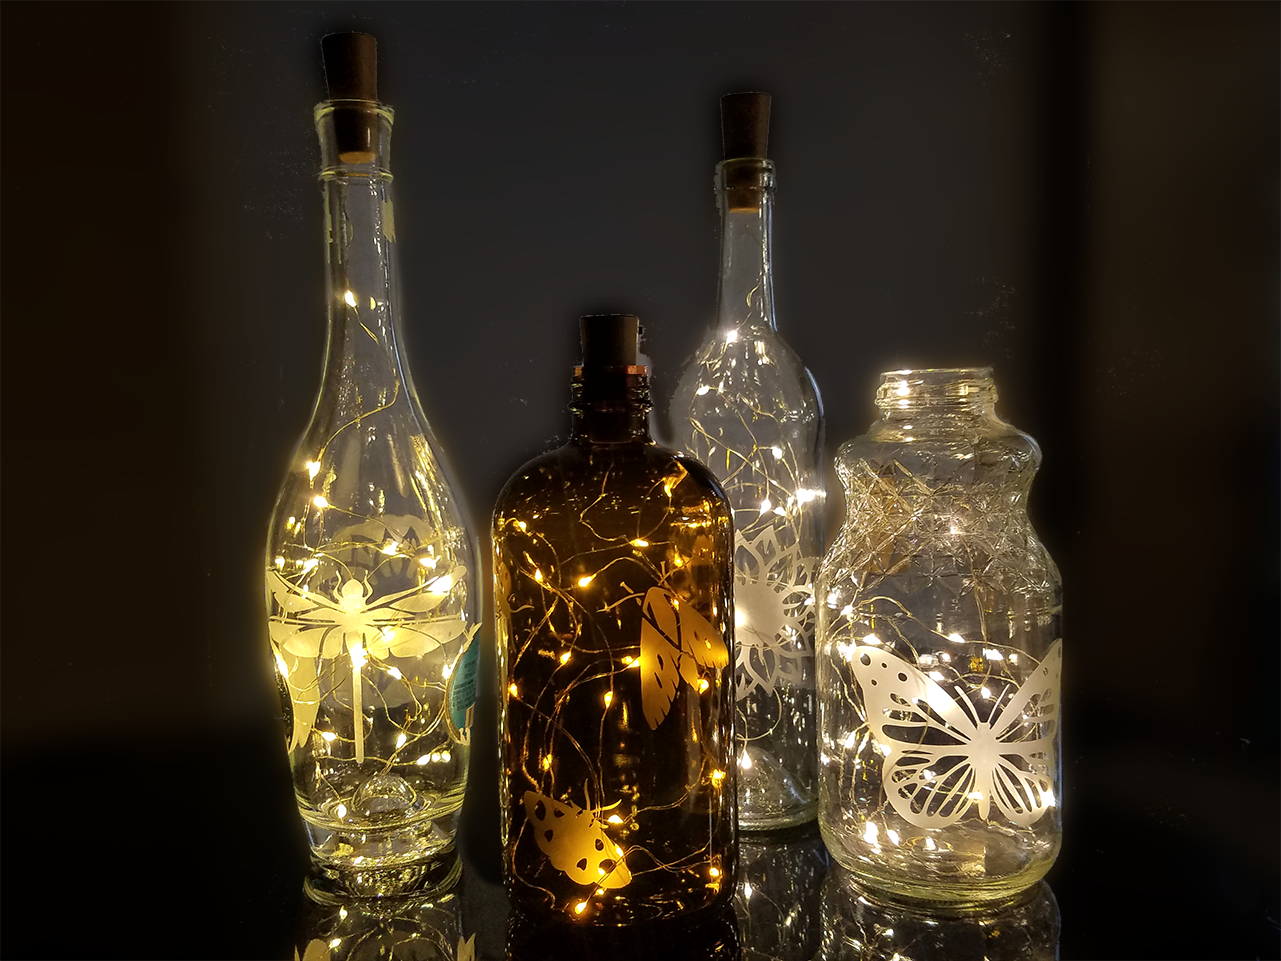 Bottles etched with insect and nature designs and glowing from string lights placed inside.